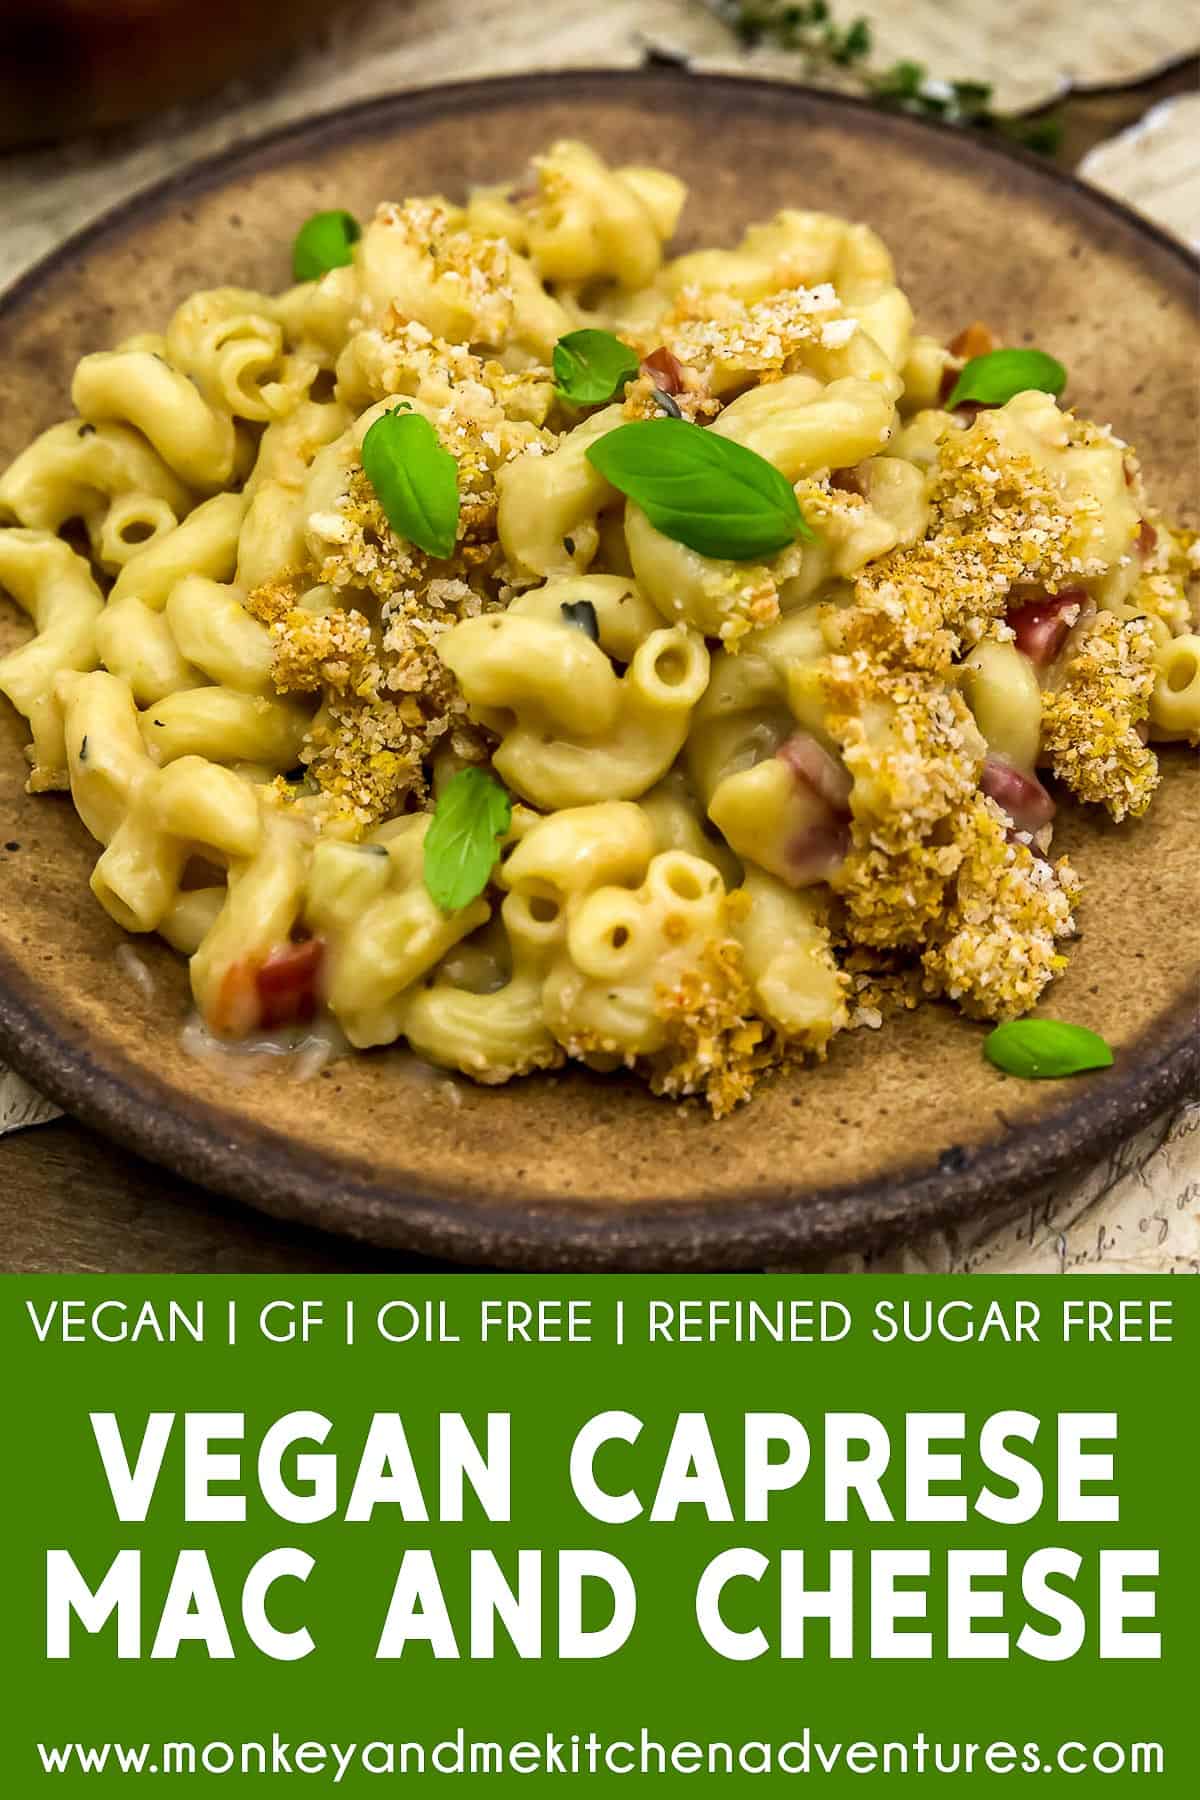 Vegan Caprese Mac and Cheese with text description